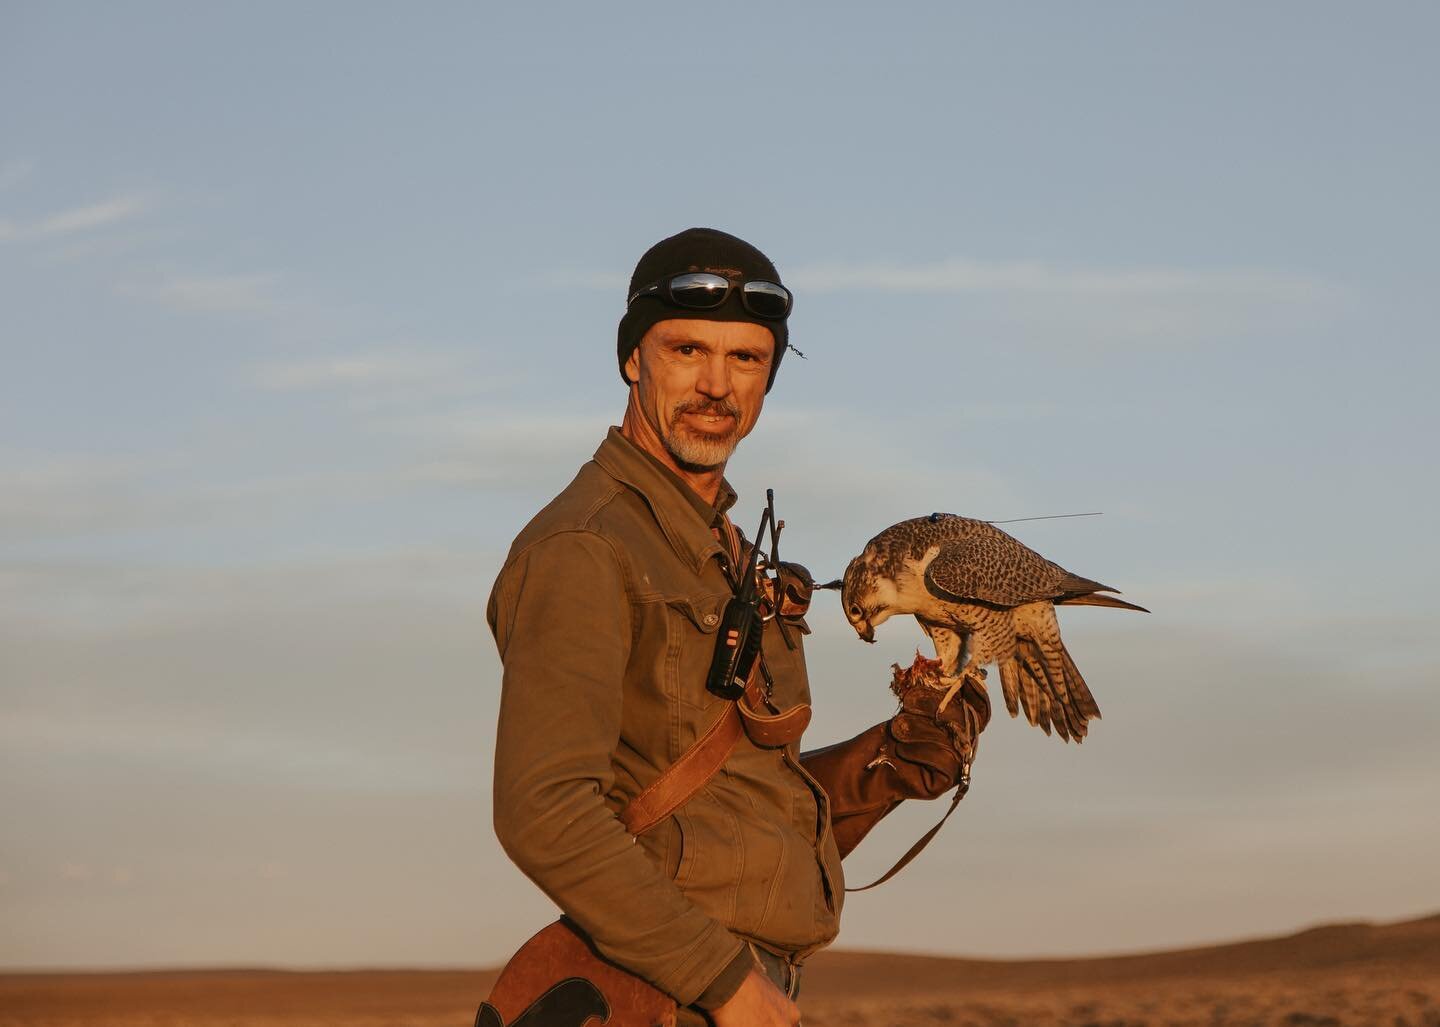 Episode 46: Steve Jones, The School Bus Falconers.

Each year, a hardy group of falconers tow their campers and teepees far into the remote southwestern Wyoming desert, where they situate them around Steve Jones' customized school bus. In this episod